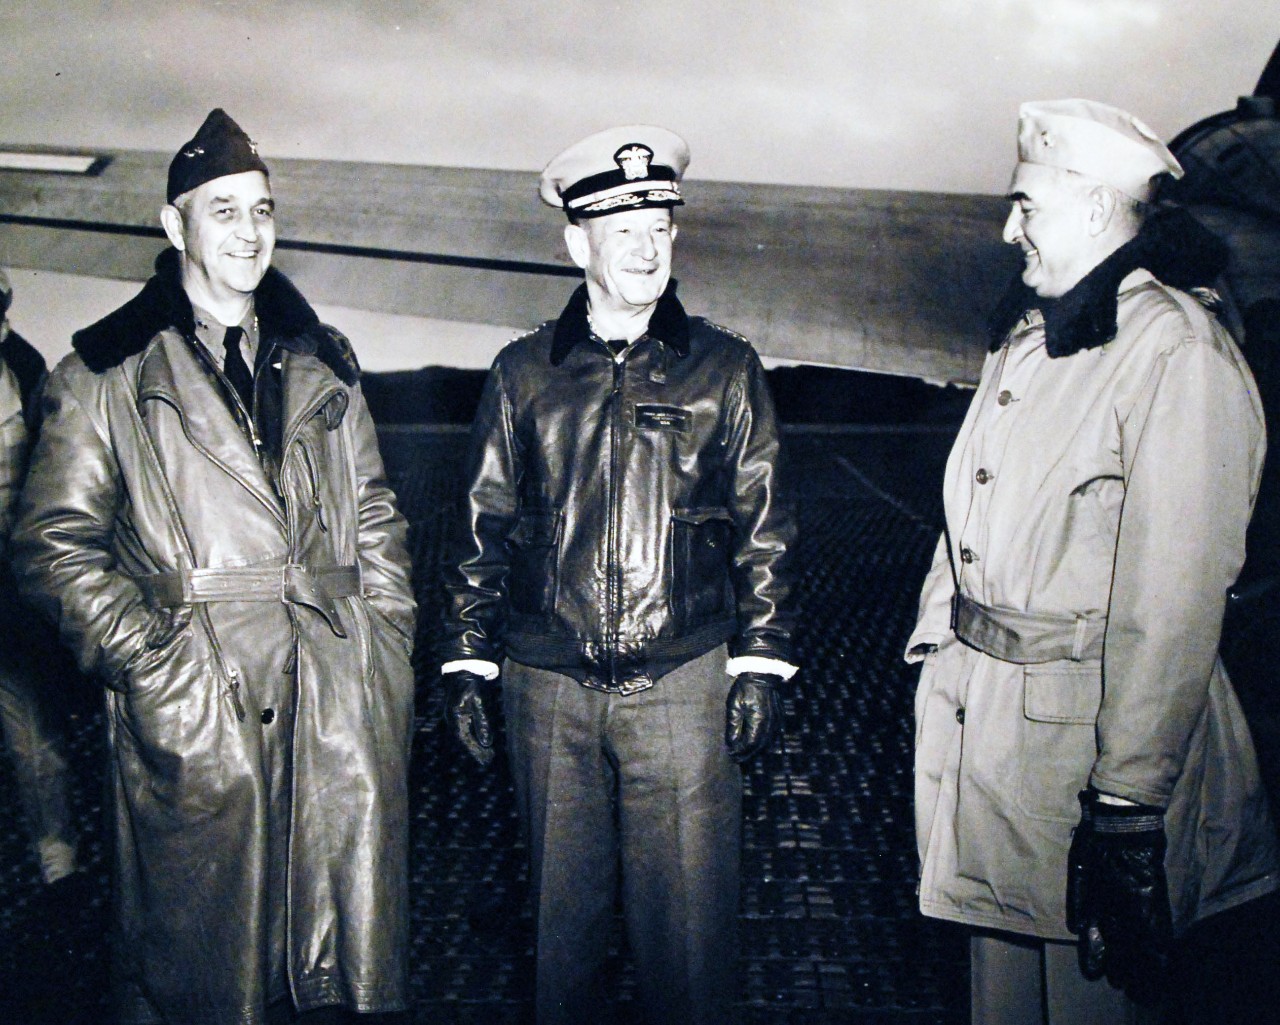 80-G-265229:     Attu Island, Alaska, October 1944.  Rear Admiral Ralph F. Wood, left, upon his arrival at Attu Islands in the Aleutian is met by Vice Admiral Frank J. Fletcher and an unidentified admiral, 11 October 1944.  Official U.S. Navy Photograph, now in the collections of the National Archives.   (2014/7/9).